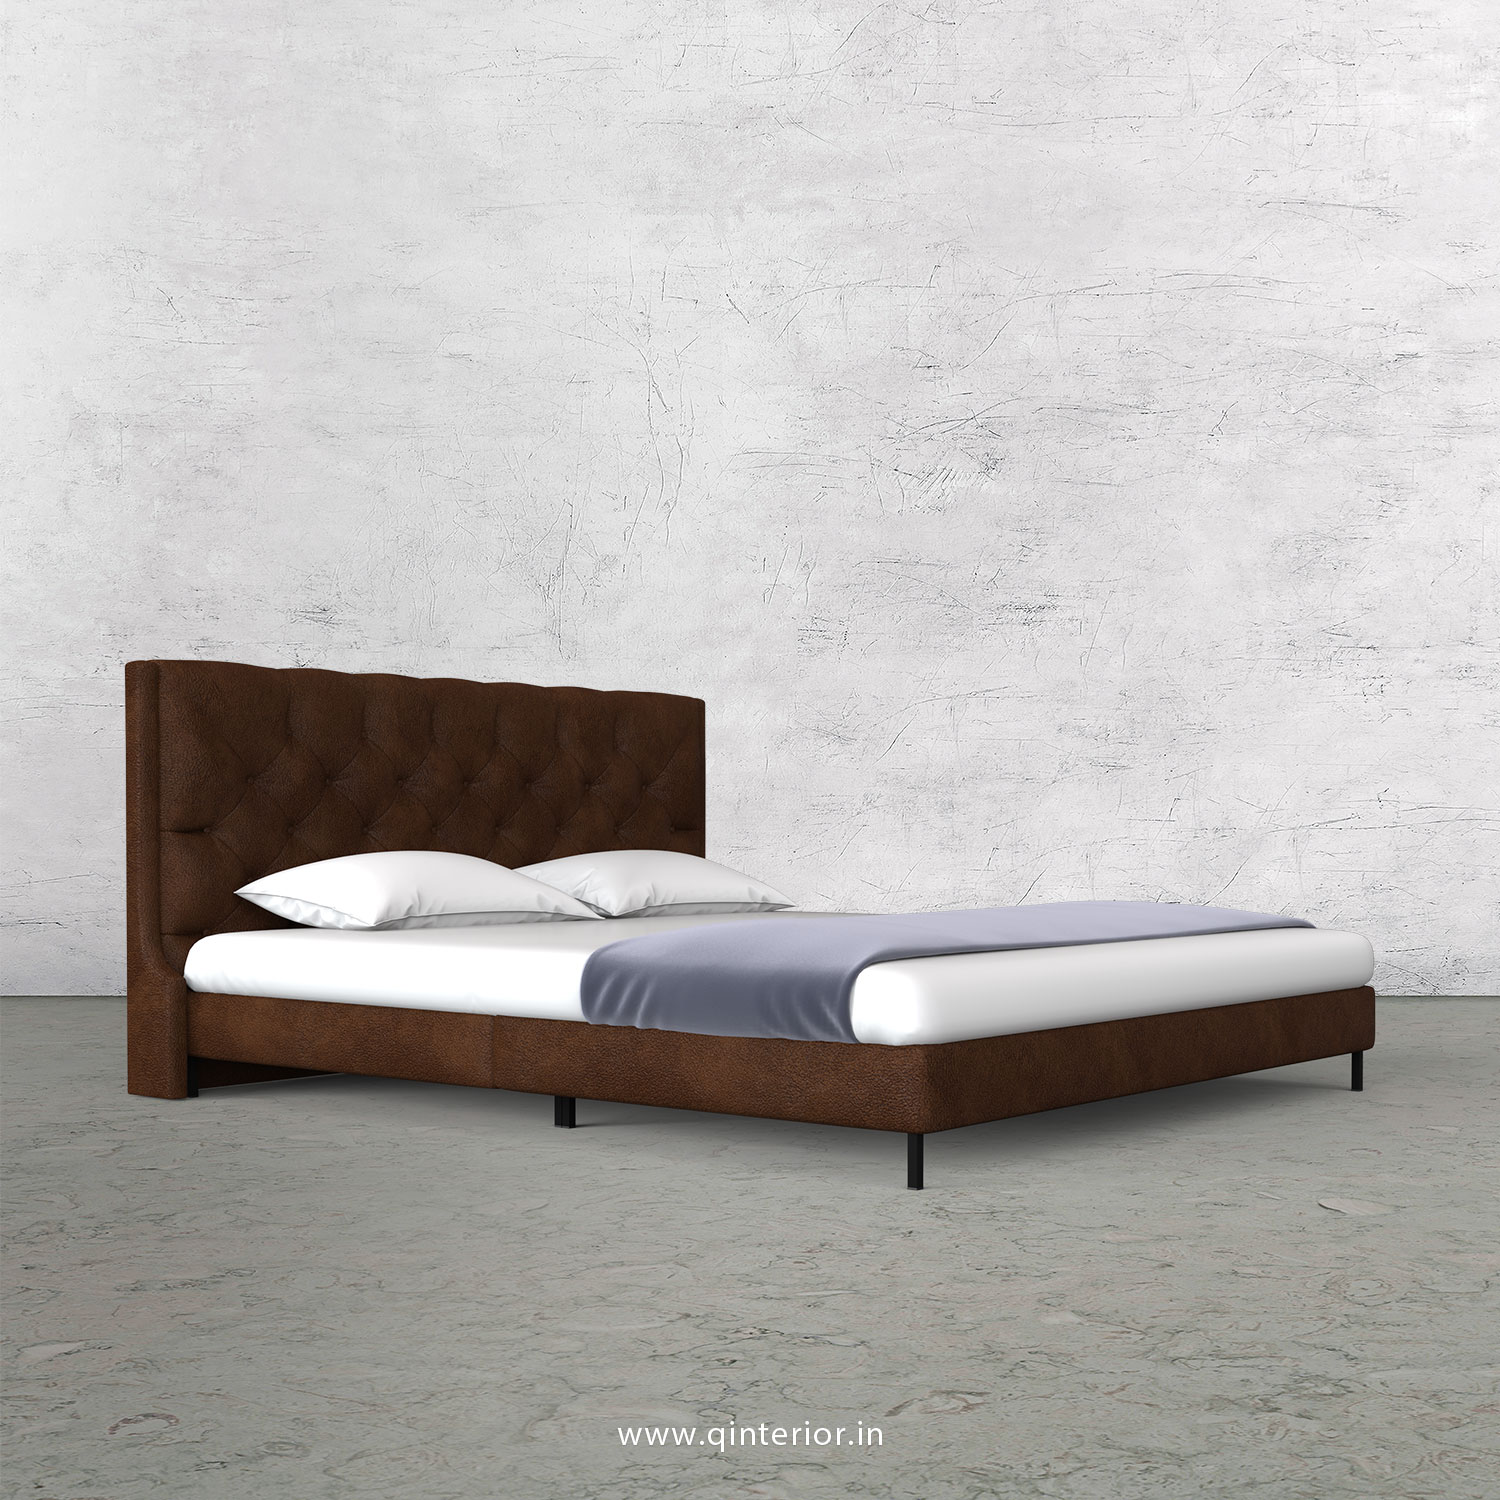 Scorpius King Size Bed in Fab Leather Fabric - KBD003 FL09